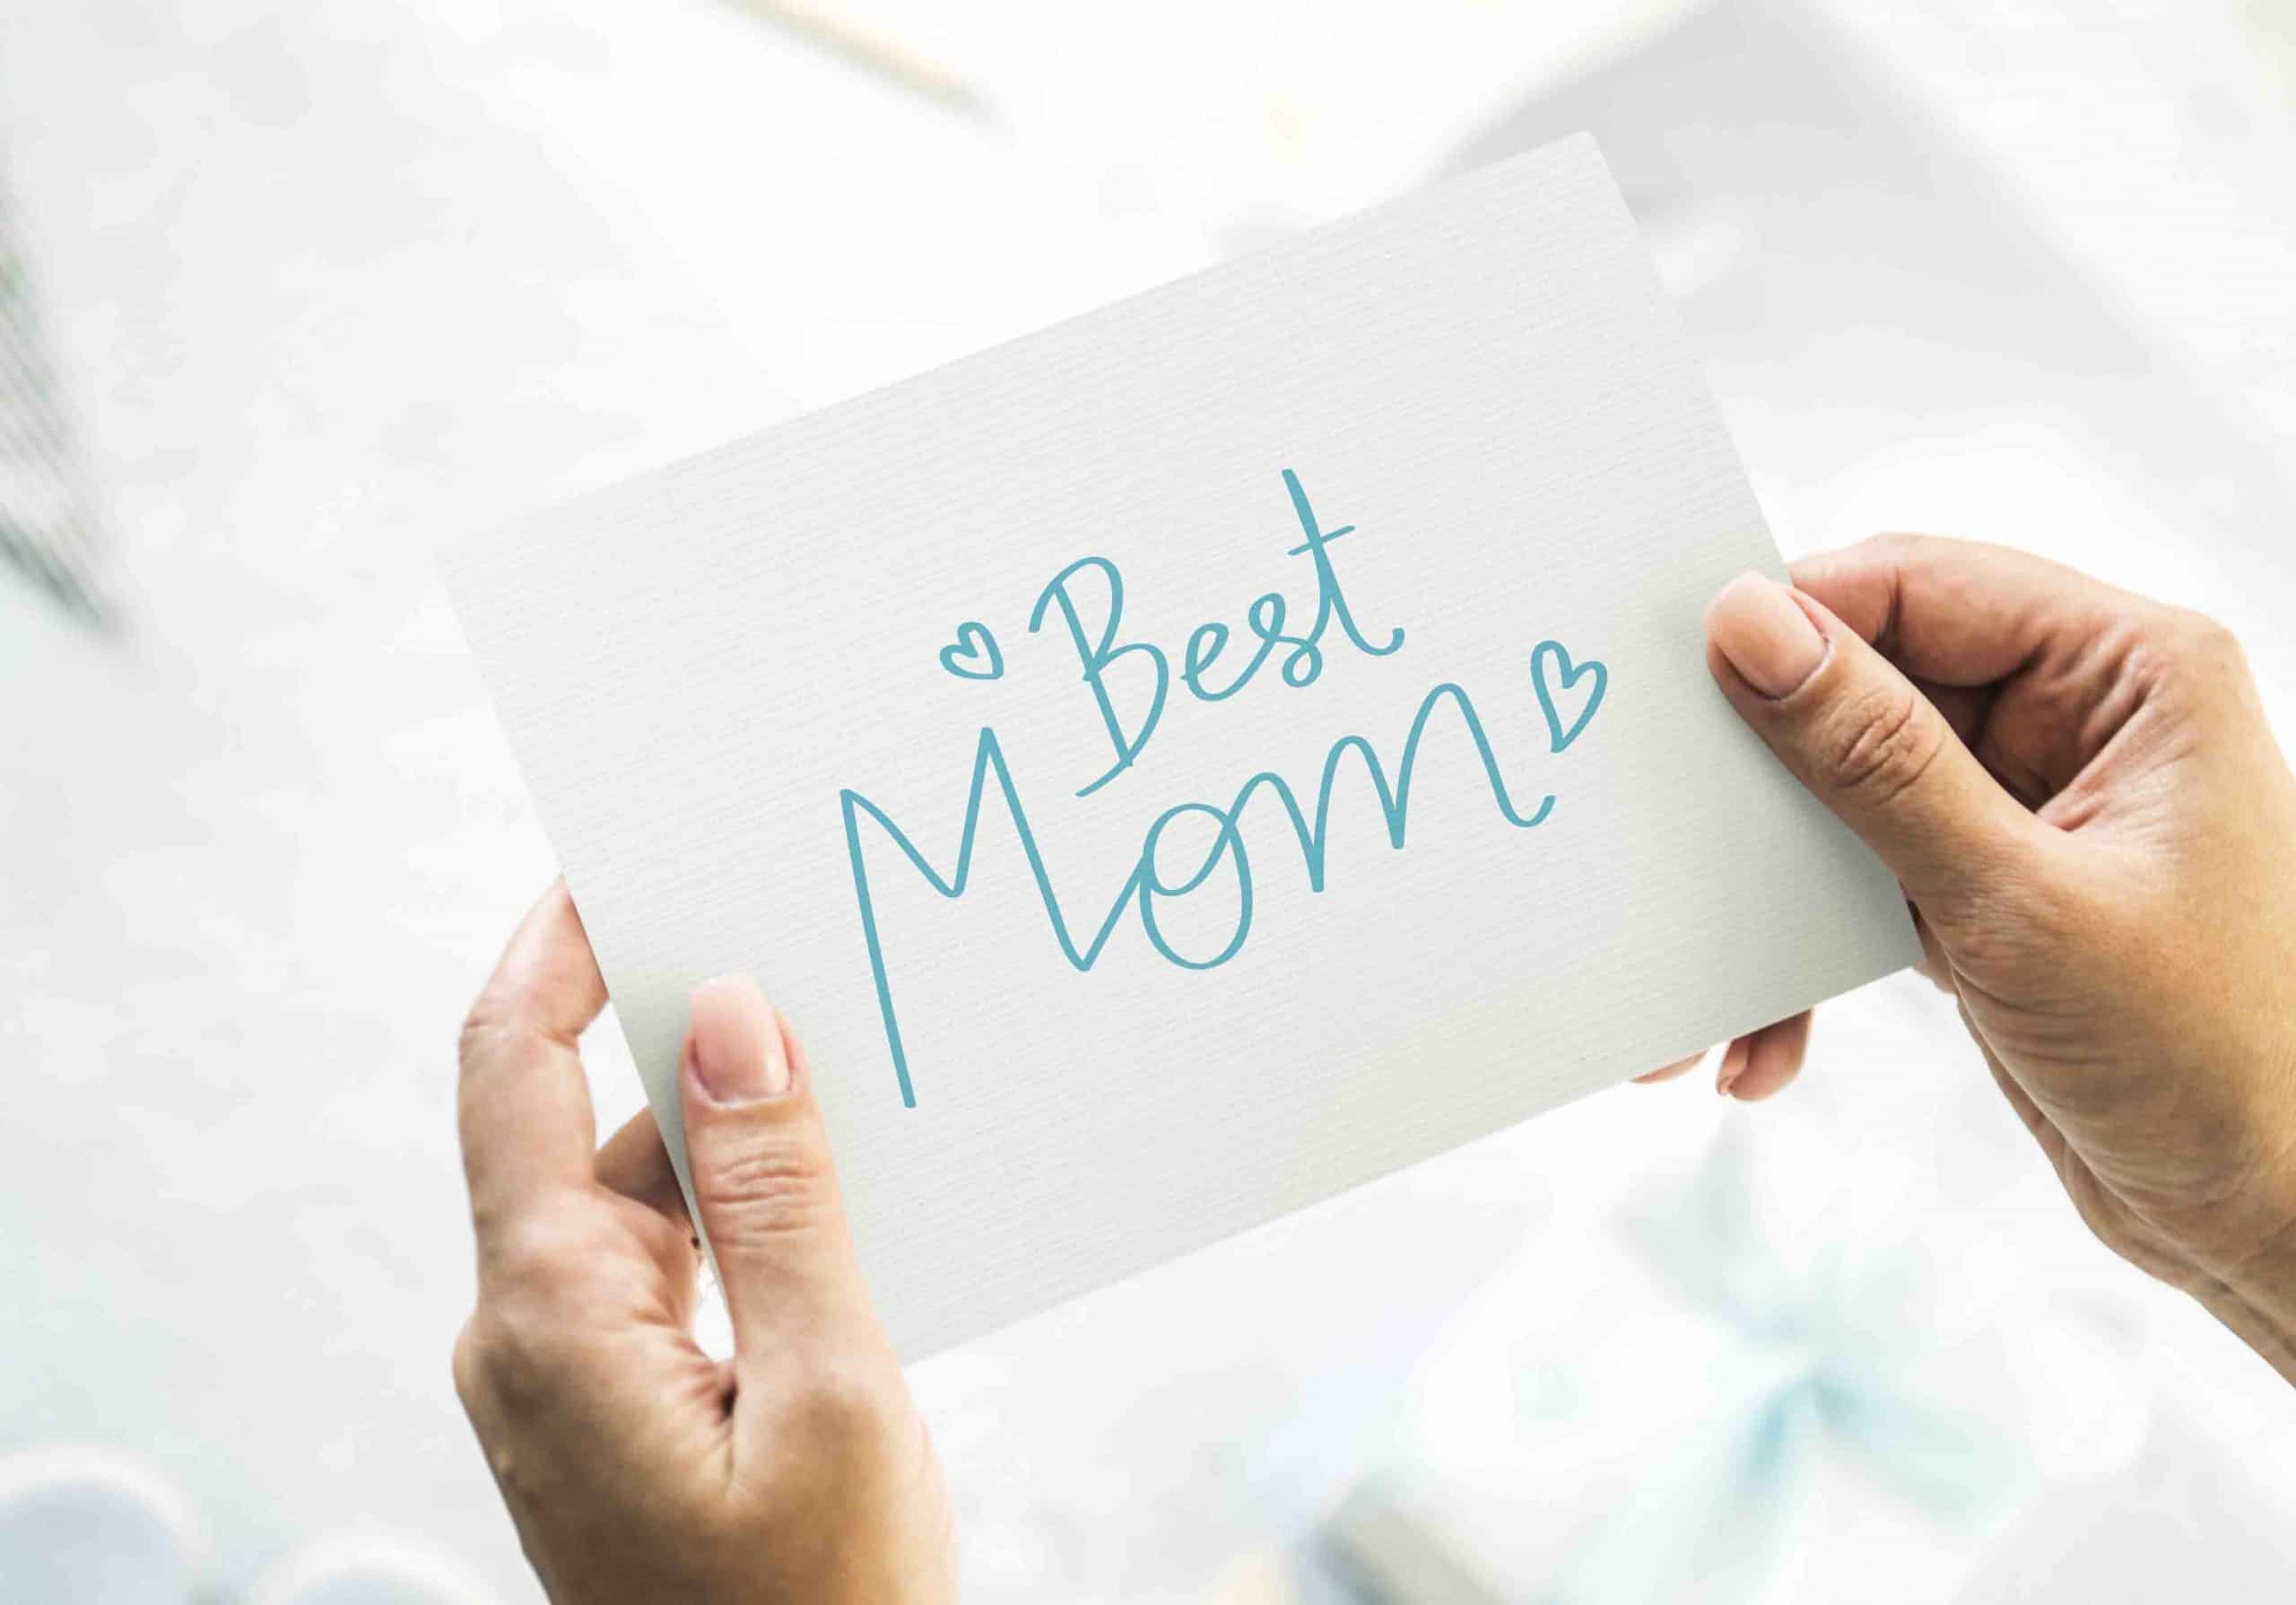 40+ Heartfelt Wishes & Quotes You Need to Write on a Baby Shower Card